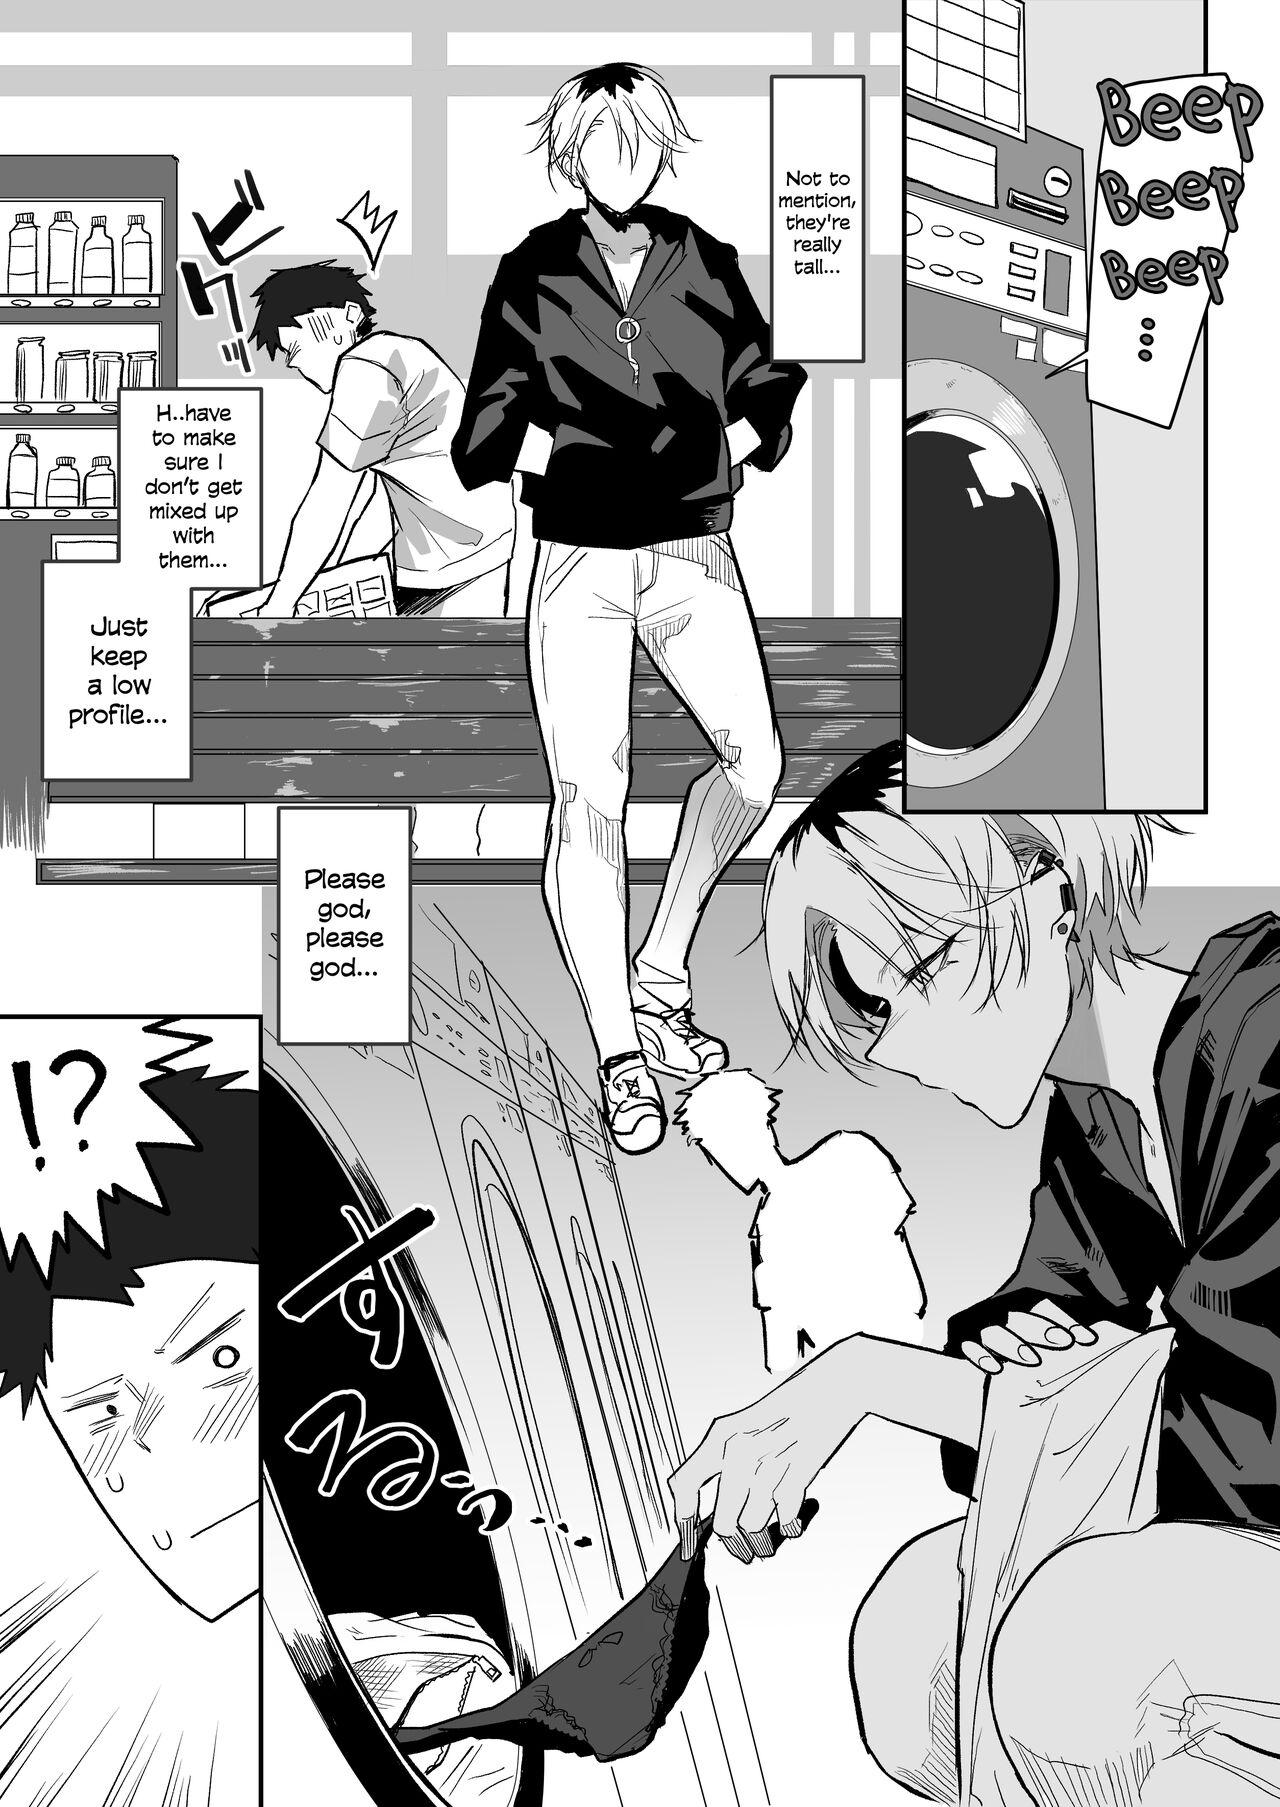 Coin Laundry de Kowai Yankee ni Karamareru Manga | A Manga About Getting Mixed Up With A Scary Delinquent At The Laundromat 2